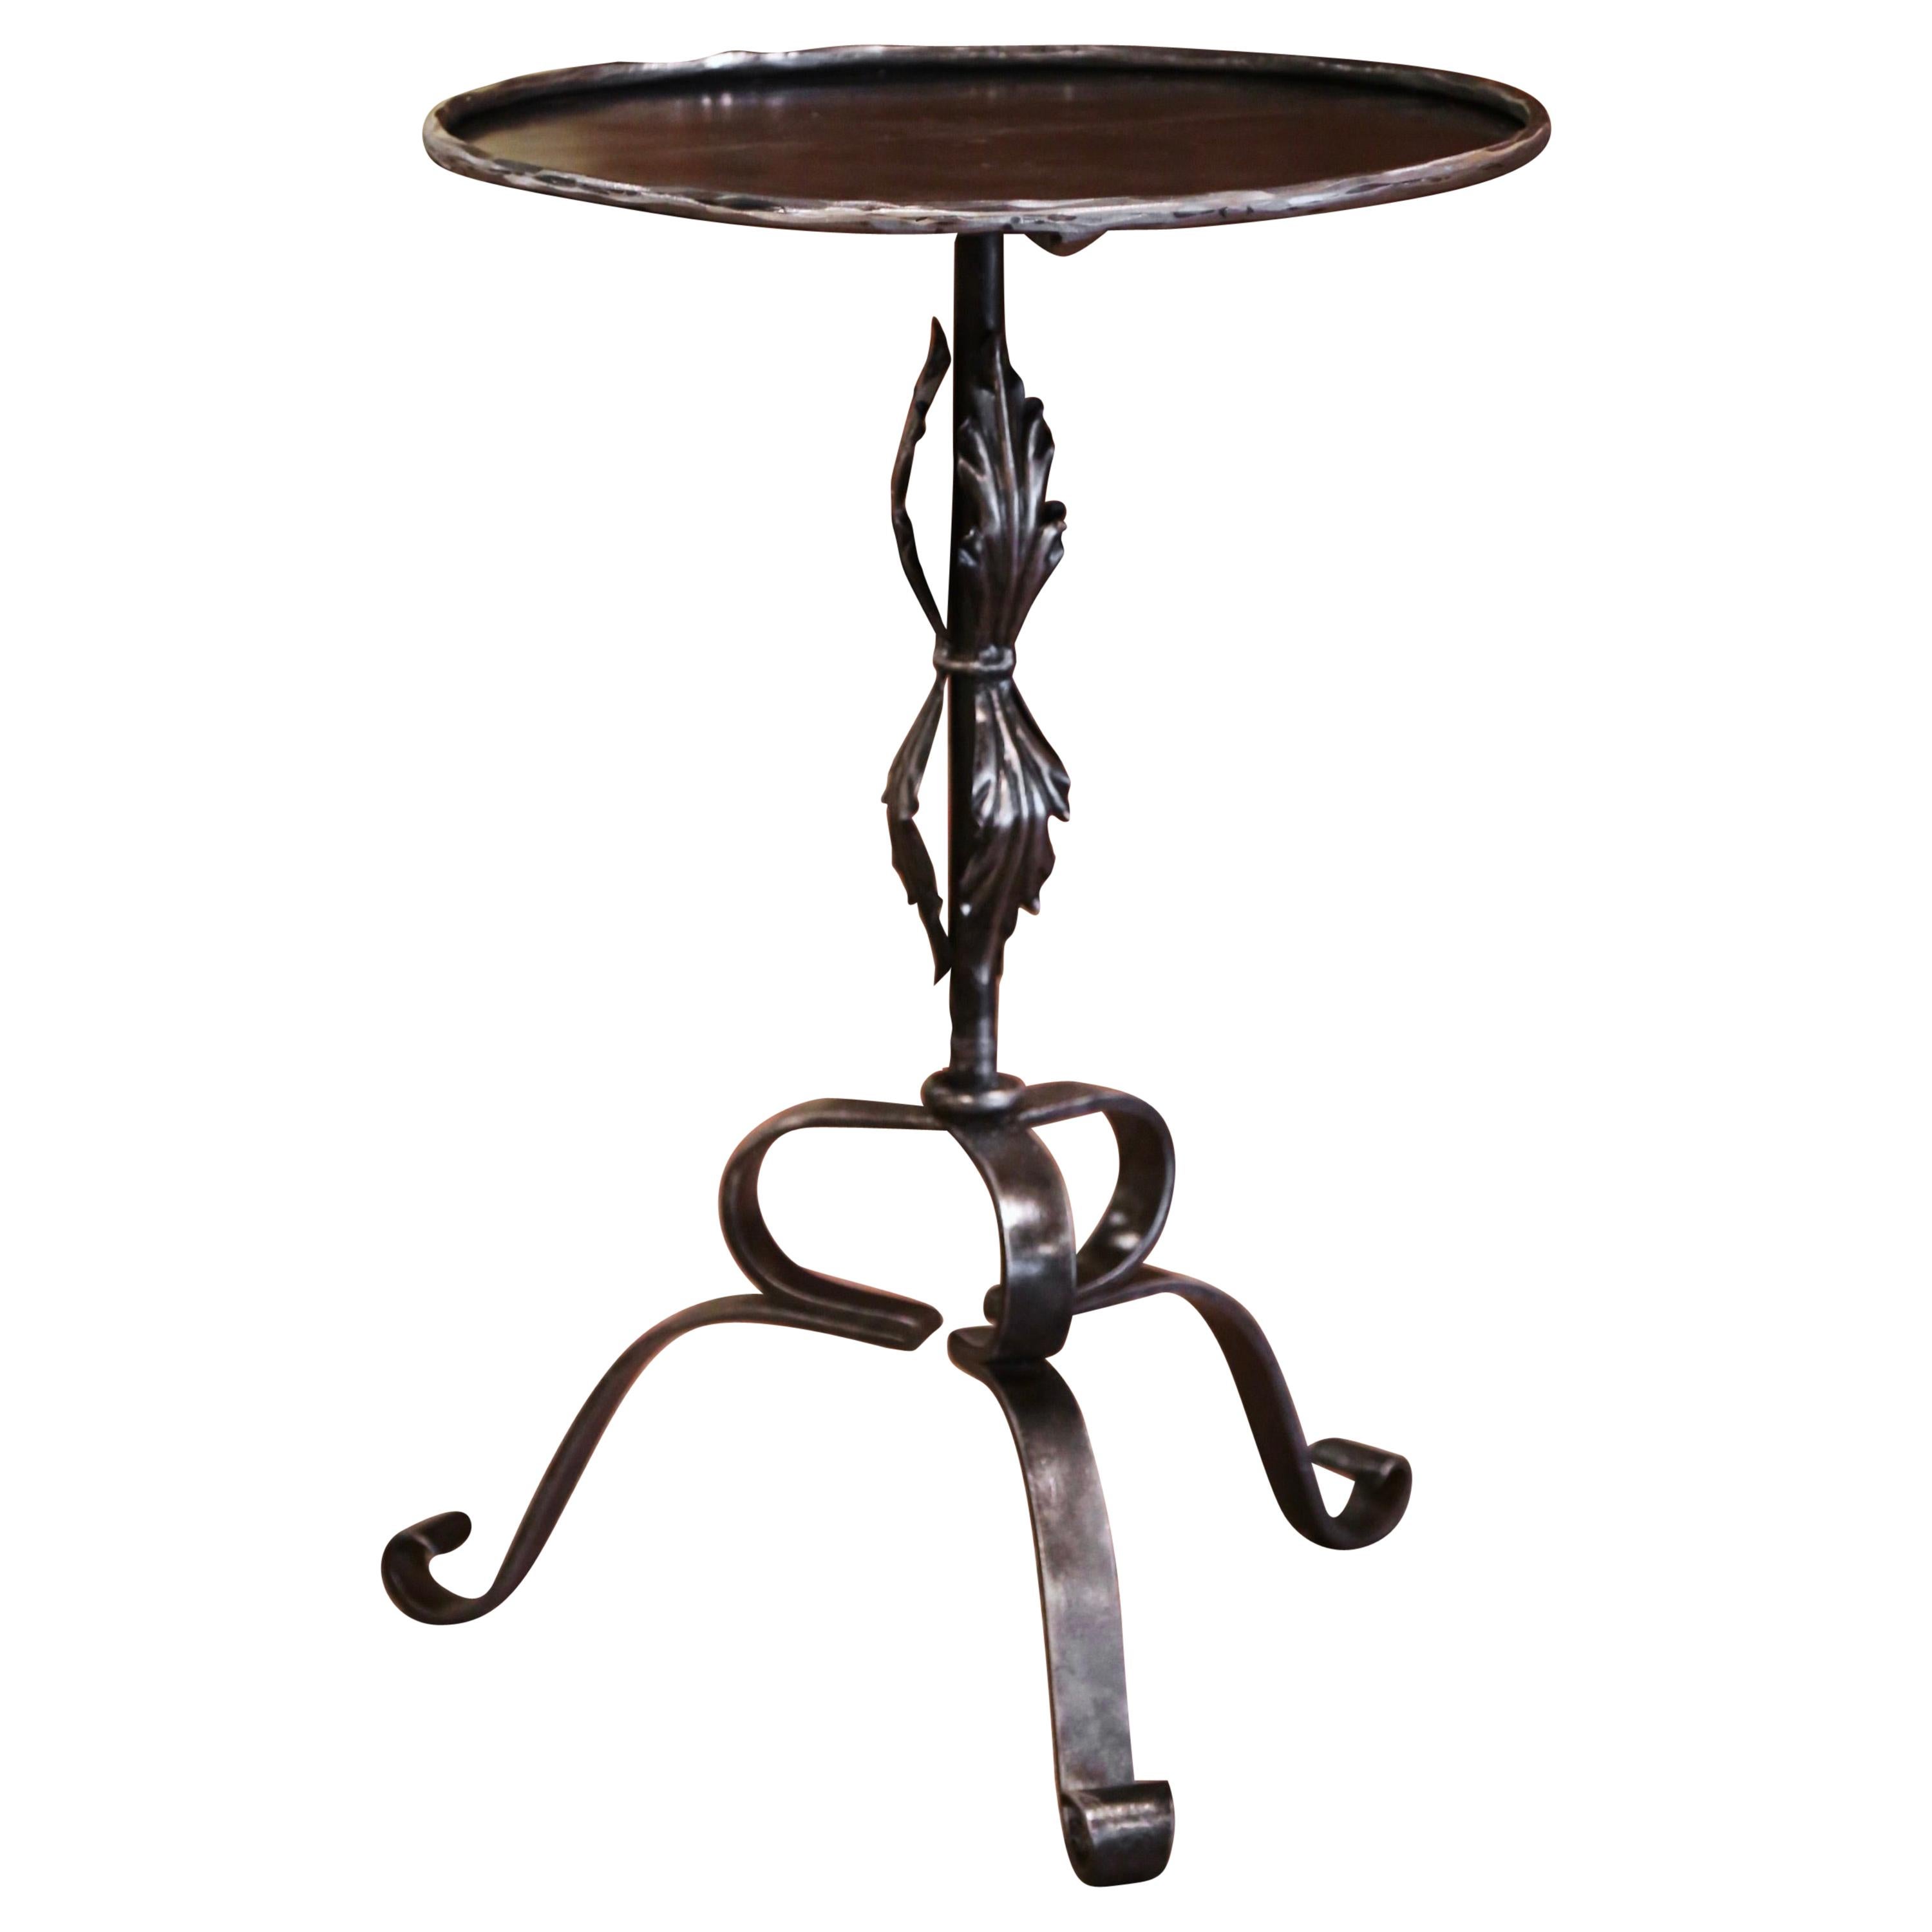 Early 20th Century French Forged and Polished Iron Martini Pedestal Table